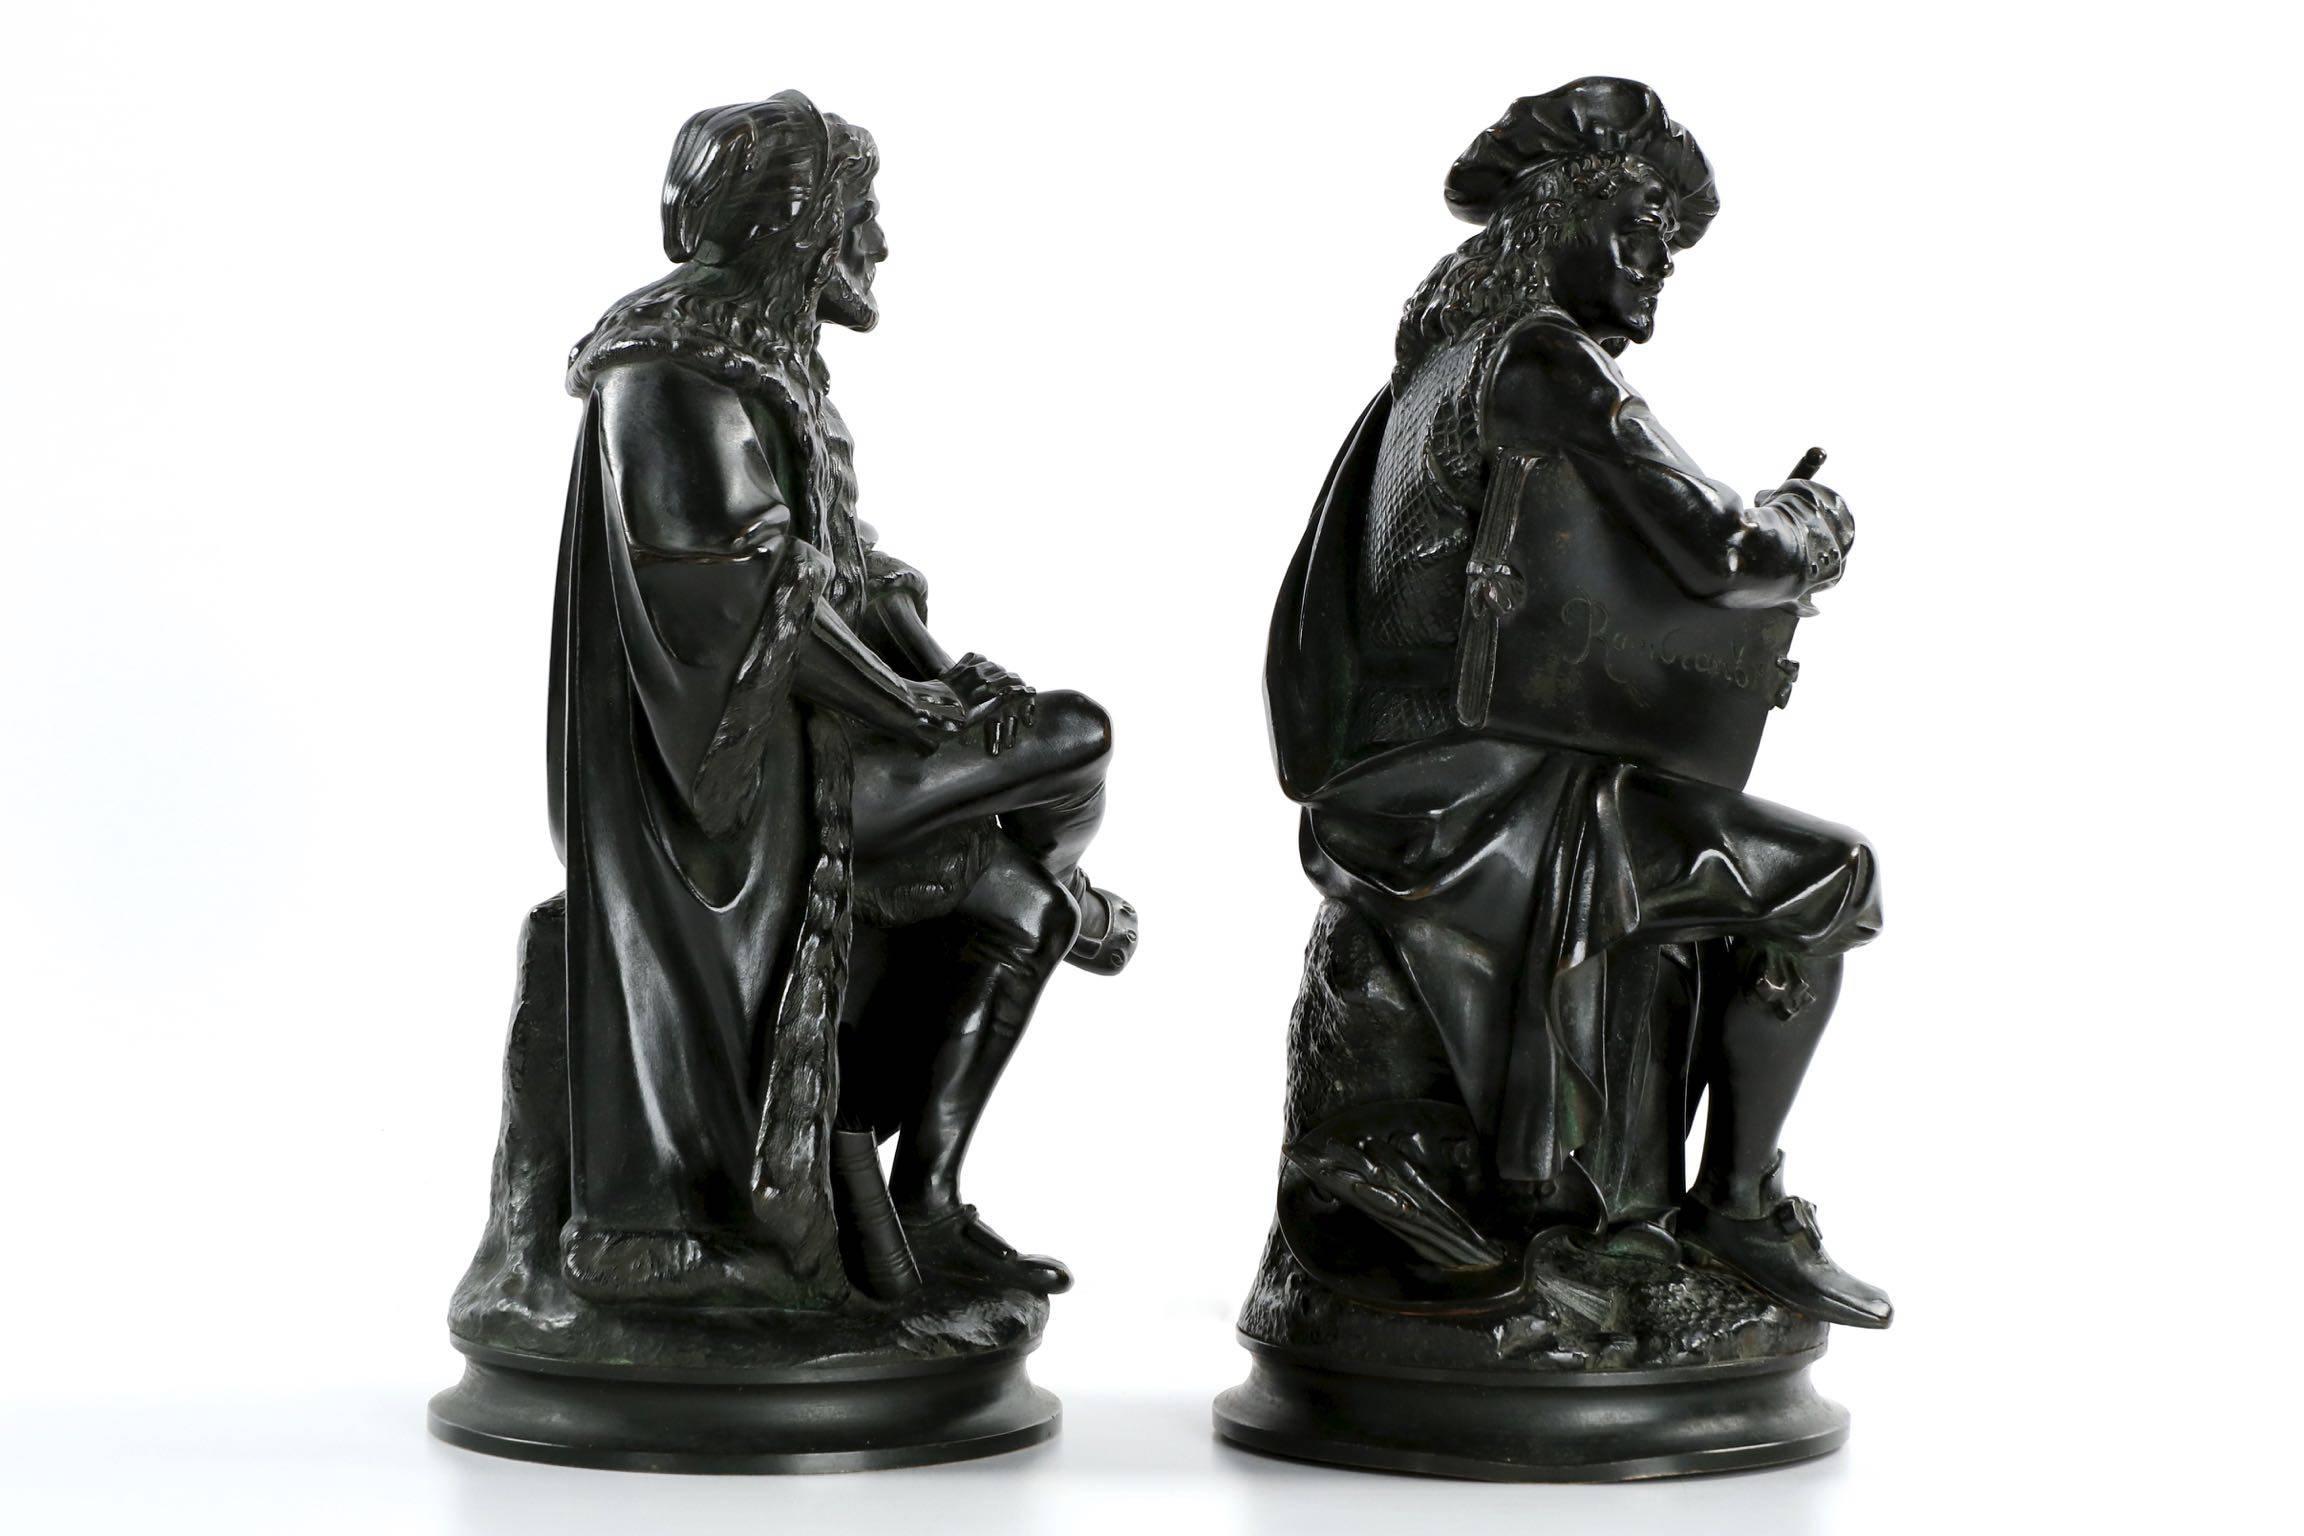 A most excellent pair of bronze sculptures capturing the seated figures of Rembrandt and Albrecht Dürer, these absolutely gorgeous sculptures are cast with utmost care and respect for the details. The figure of Albrecht Dürer is relatively uncommon